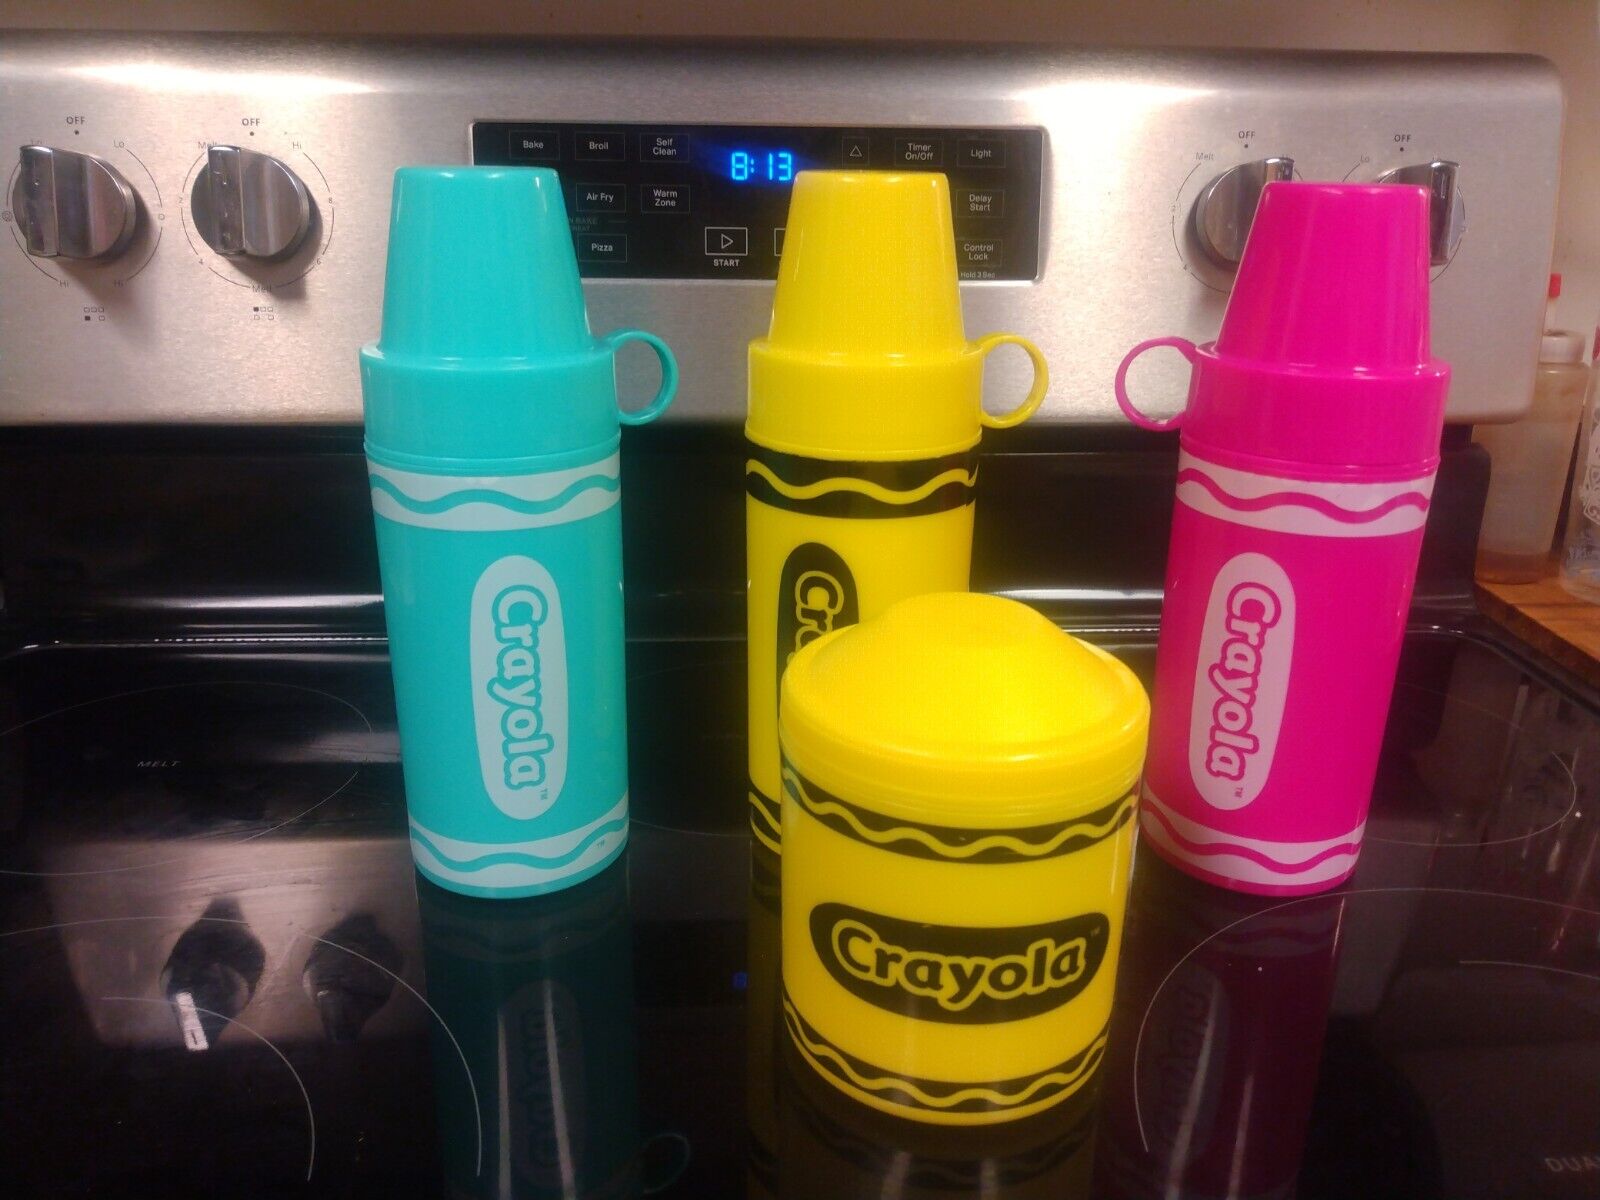 NWOT-CRAYOLA CrayonTHERMOS Food Drink Container Teal Yellow Pink - 11.5oz 2010